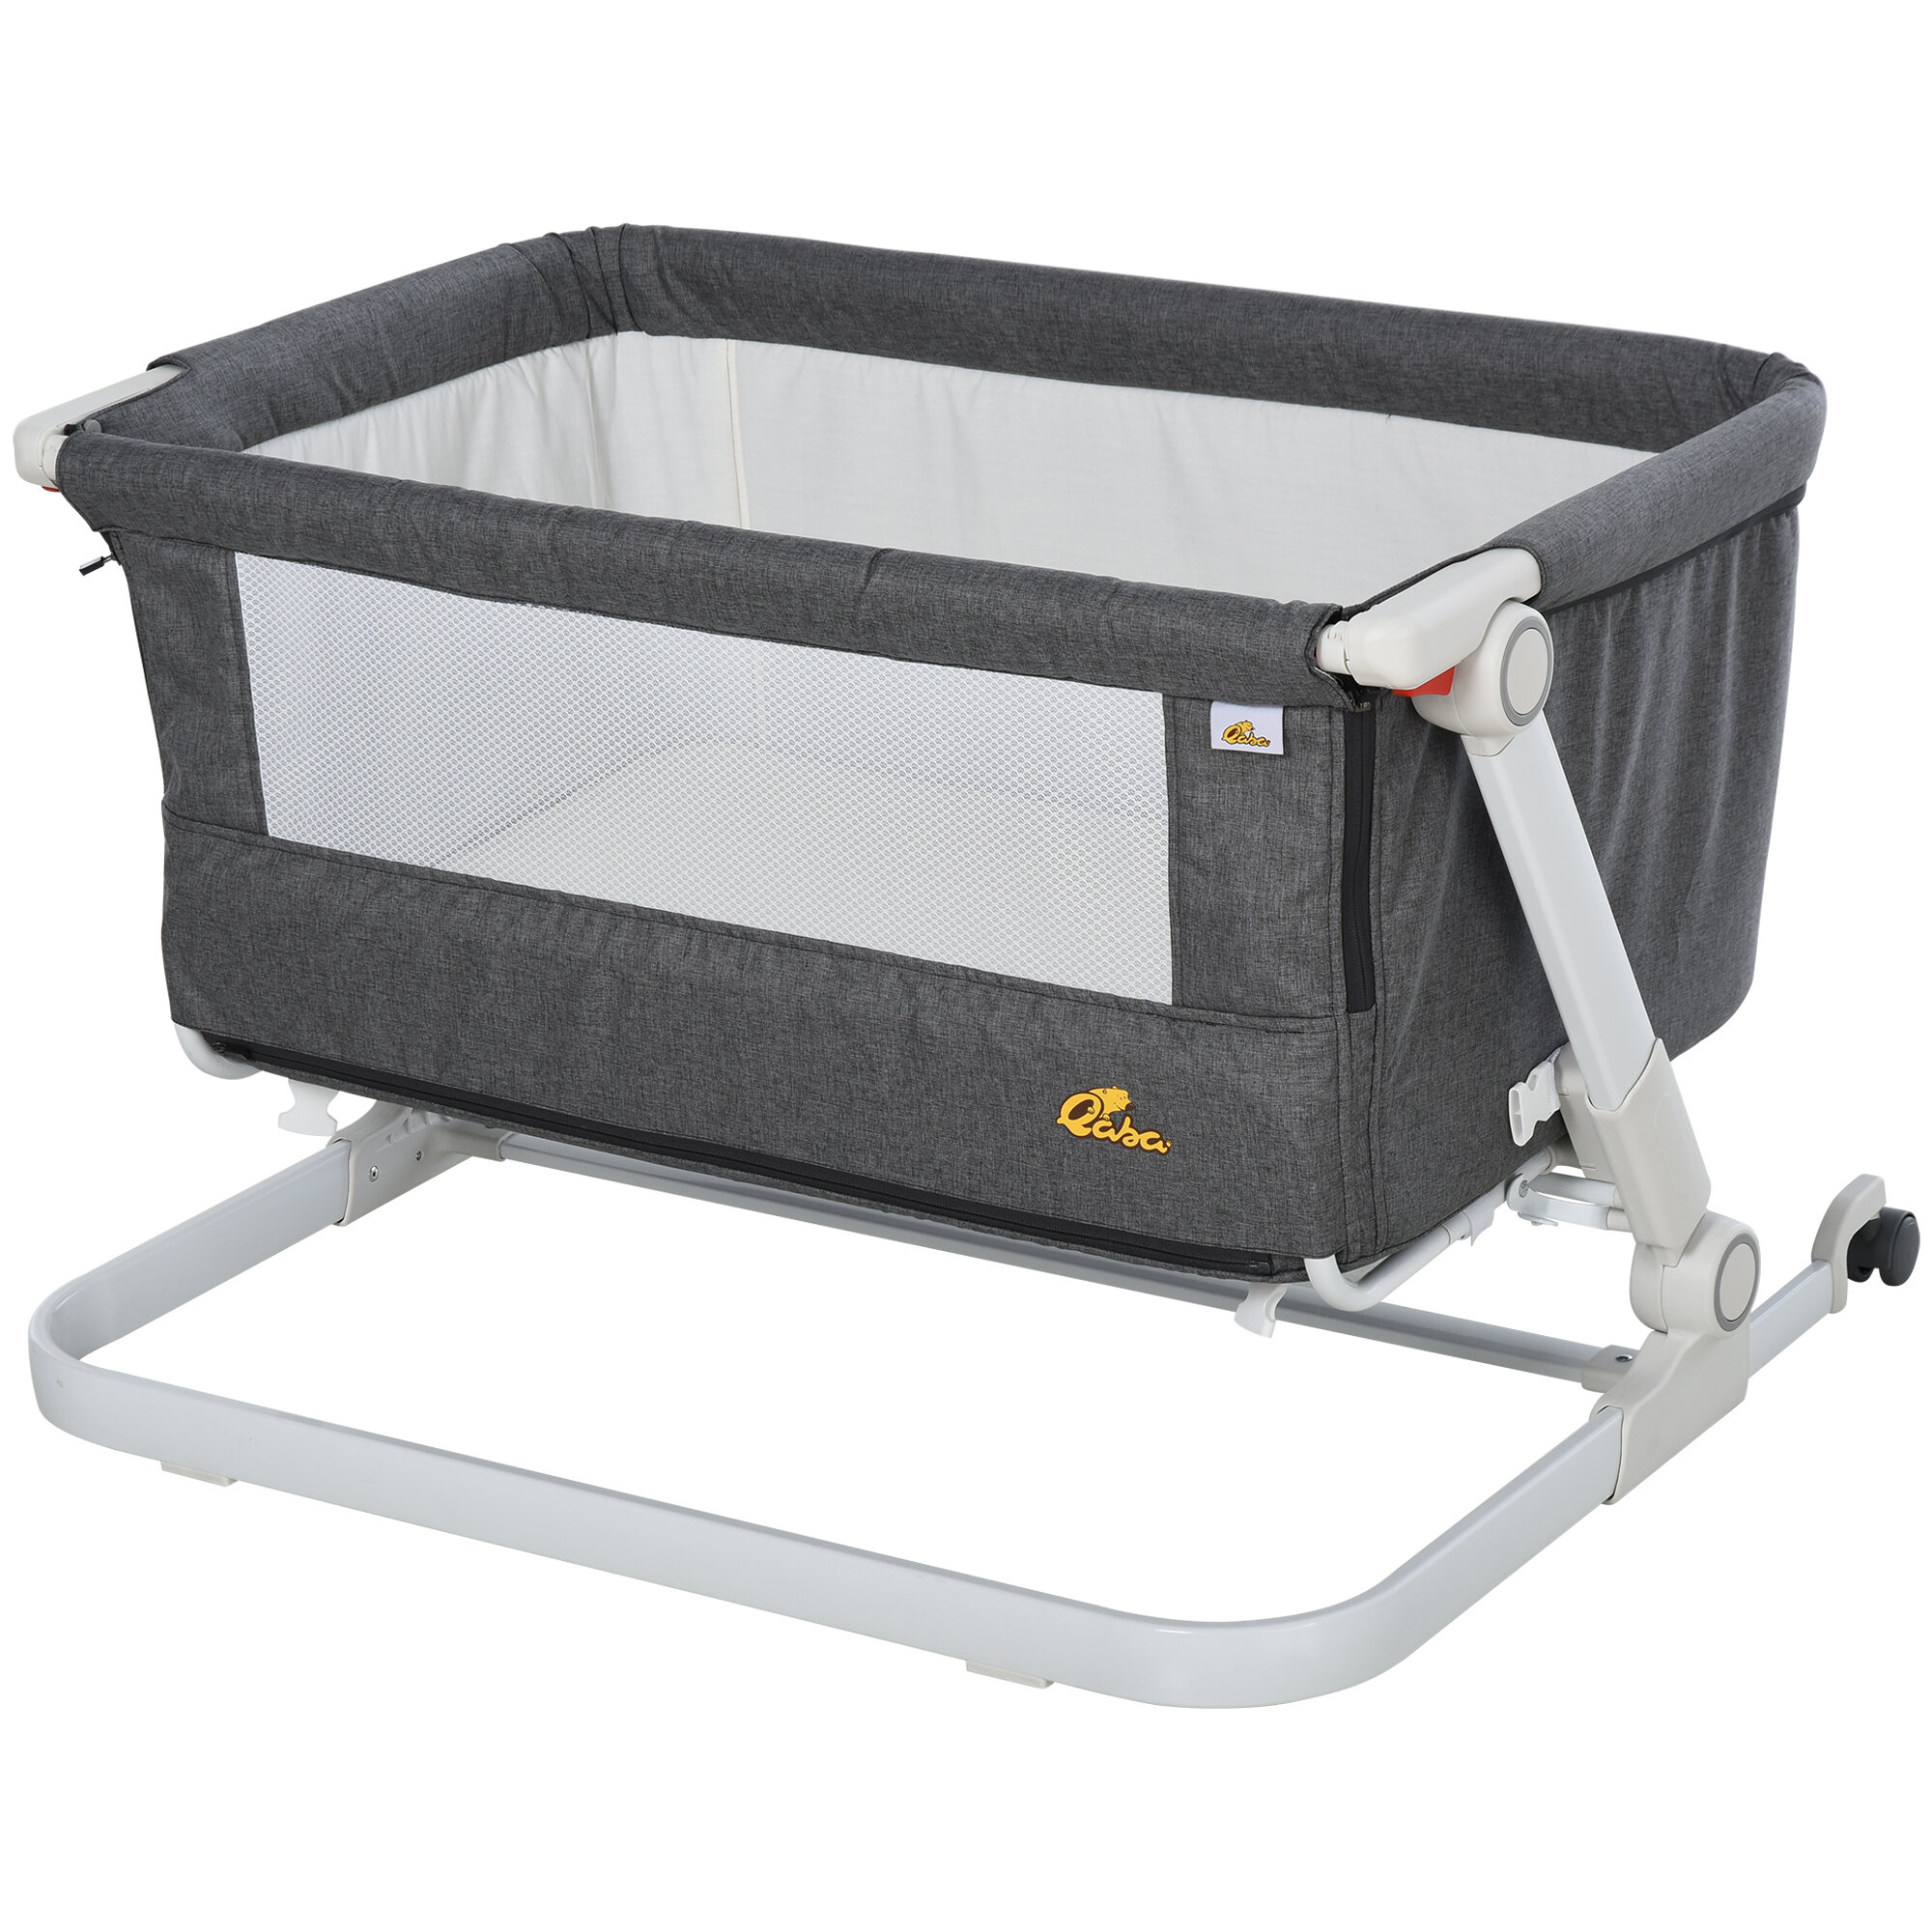 the snooze bassinet